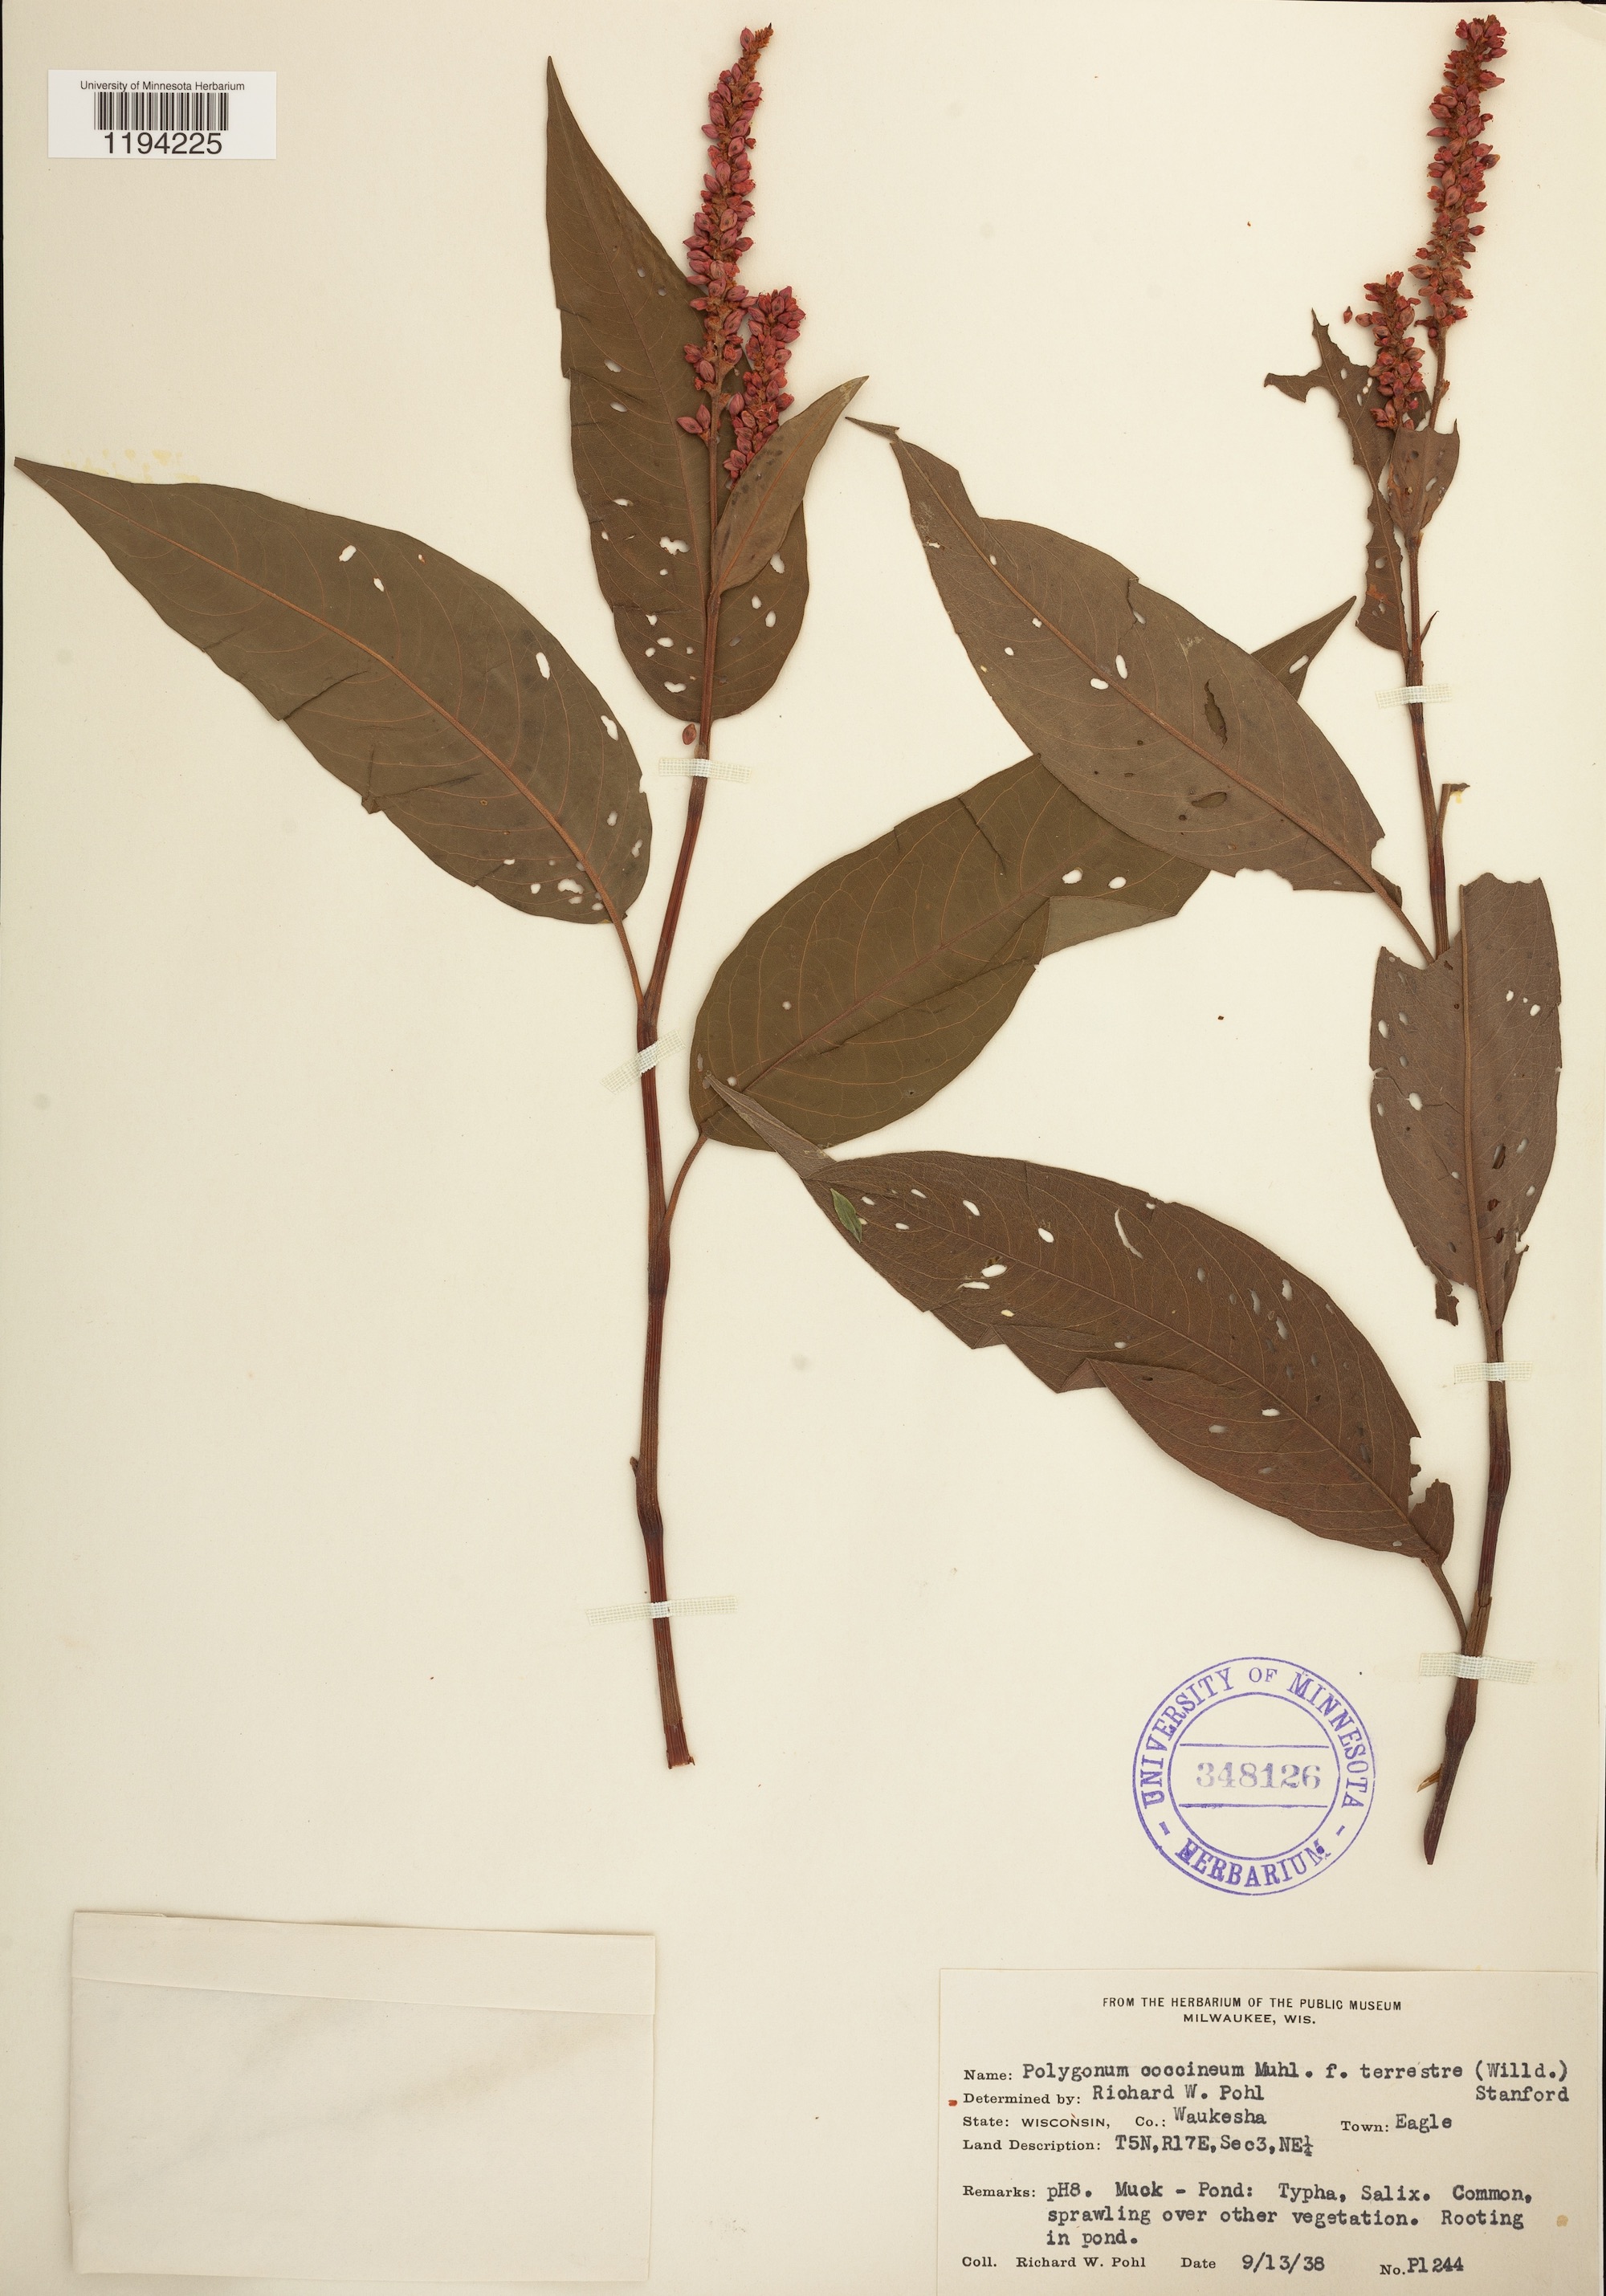 Swamp Smartweed specimen collected near the Town of Eagle in Waukesha County on September 13, 1938.